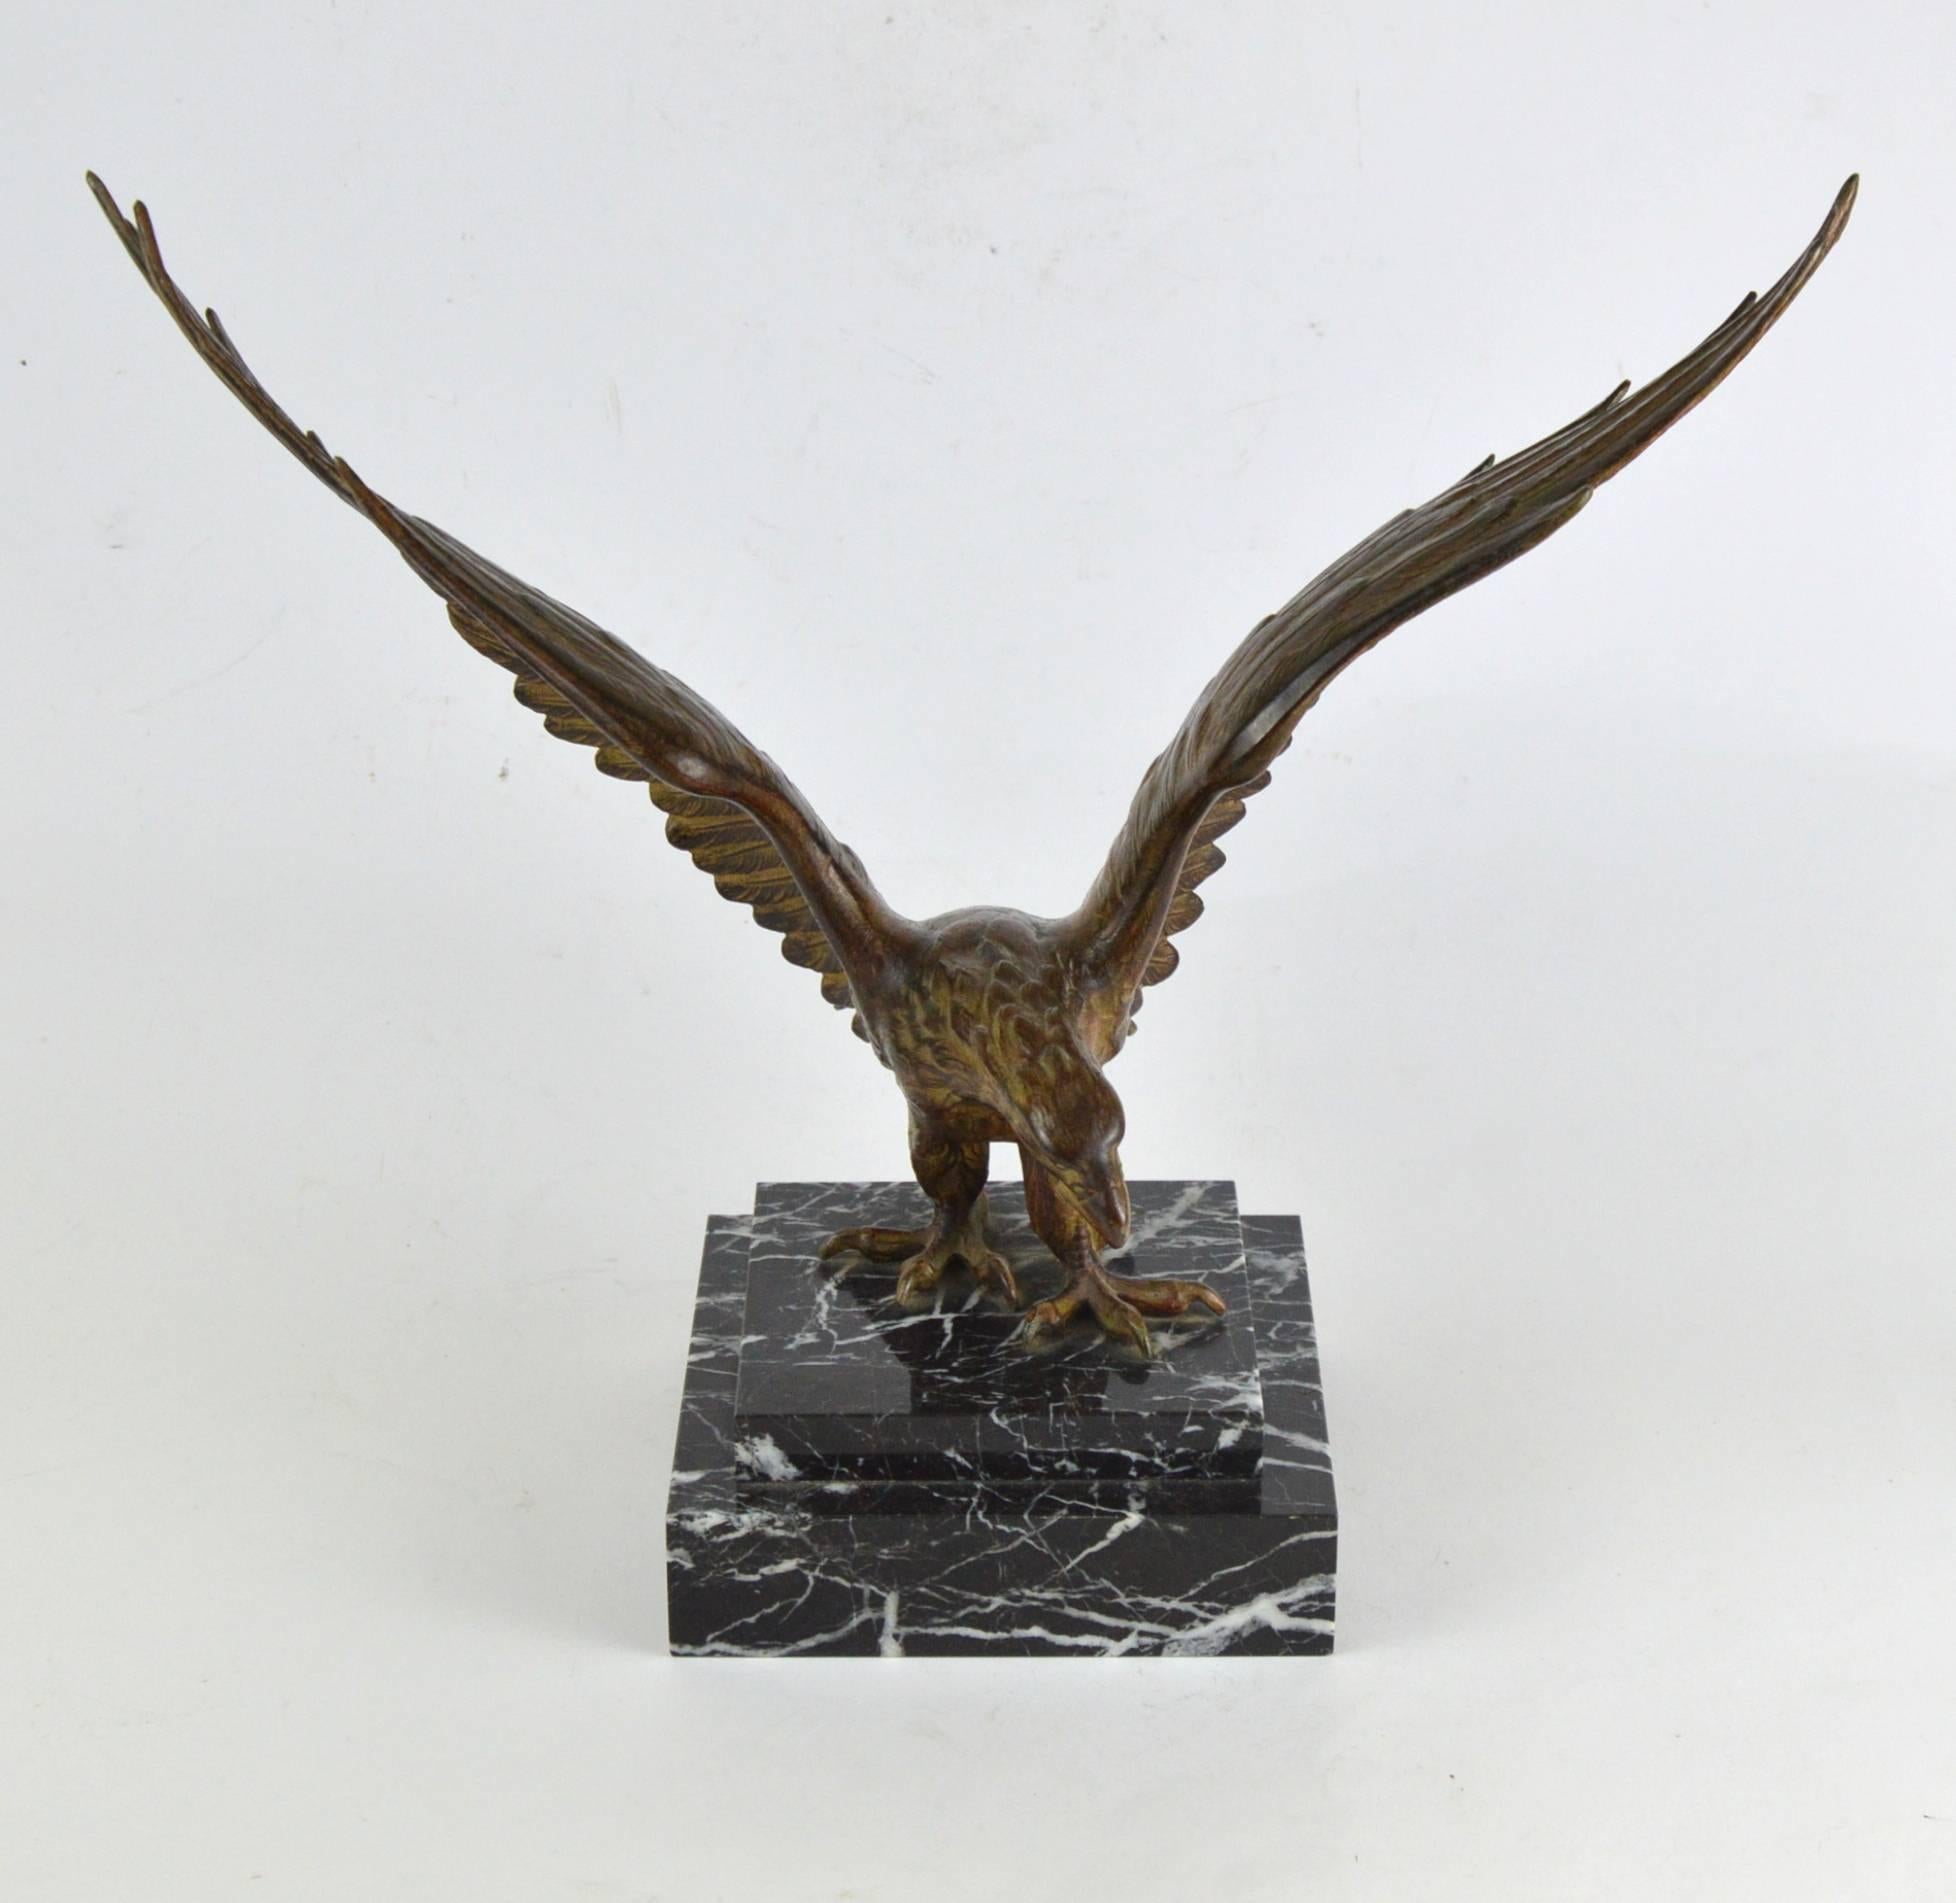 Art Deco style sculpture of an eagle on a marble base.
Measures: Height 37 cm, distance between wingtips 43 cm.